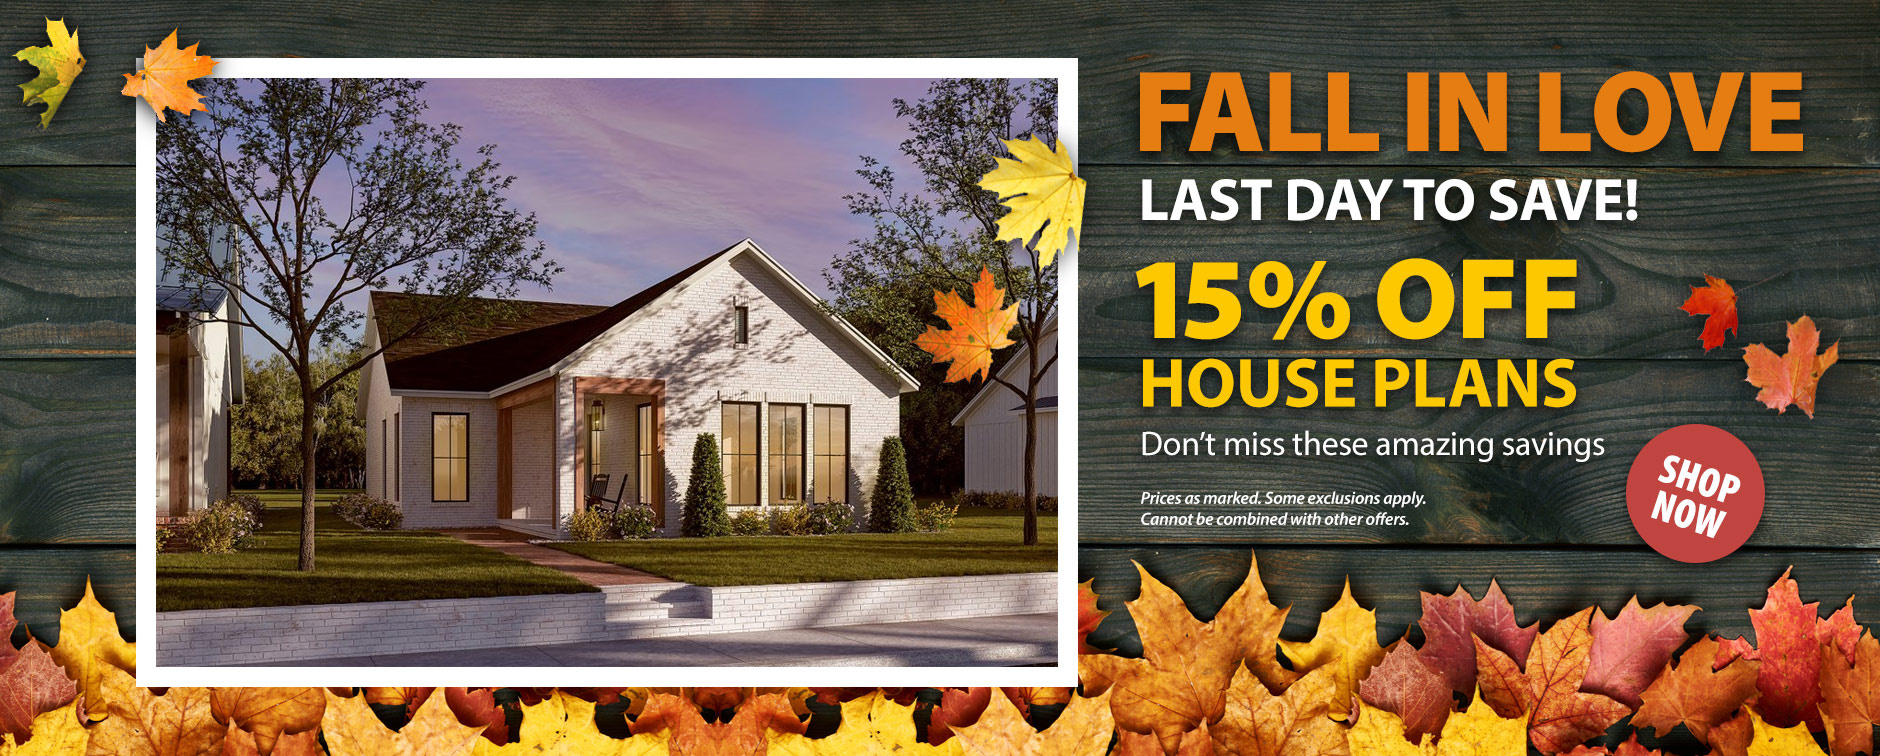 Explore Home Designs On Sale - Event Ends Tonight